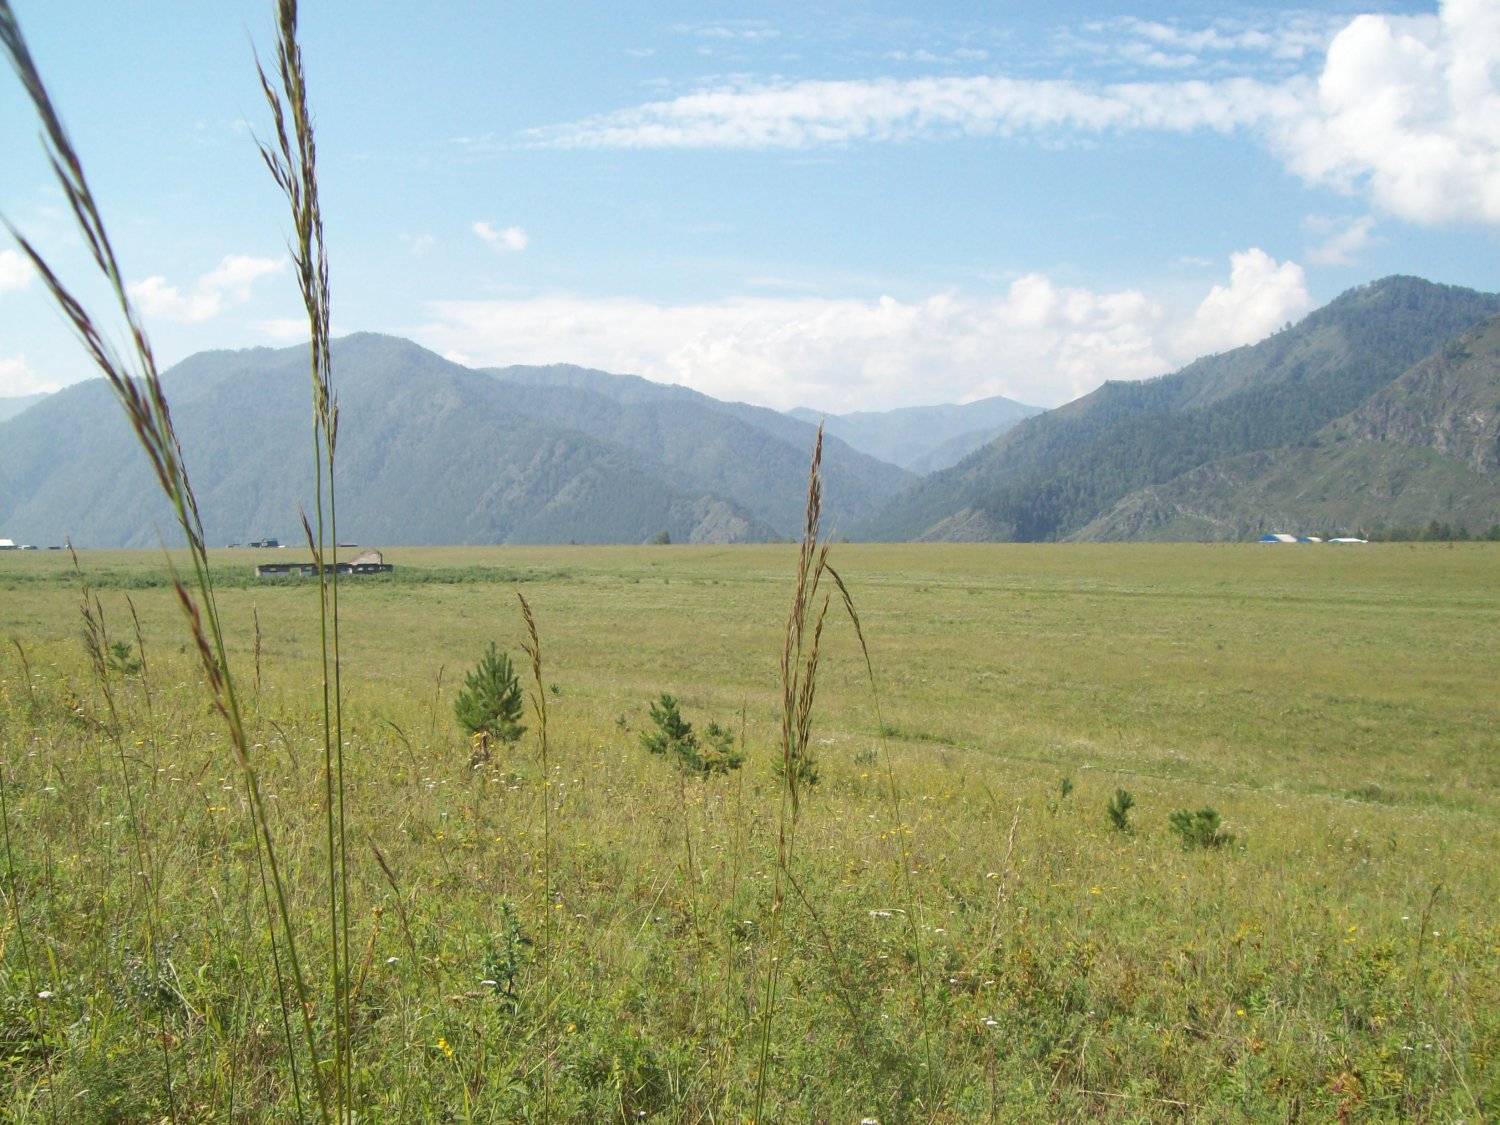 0,8 Hectar of land in the Altai mountains